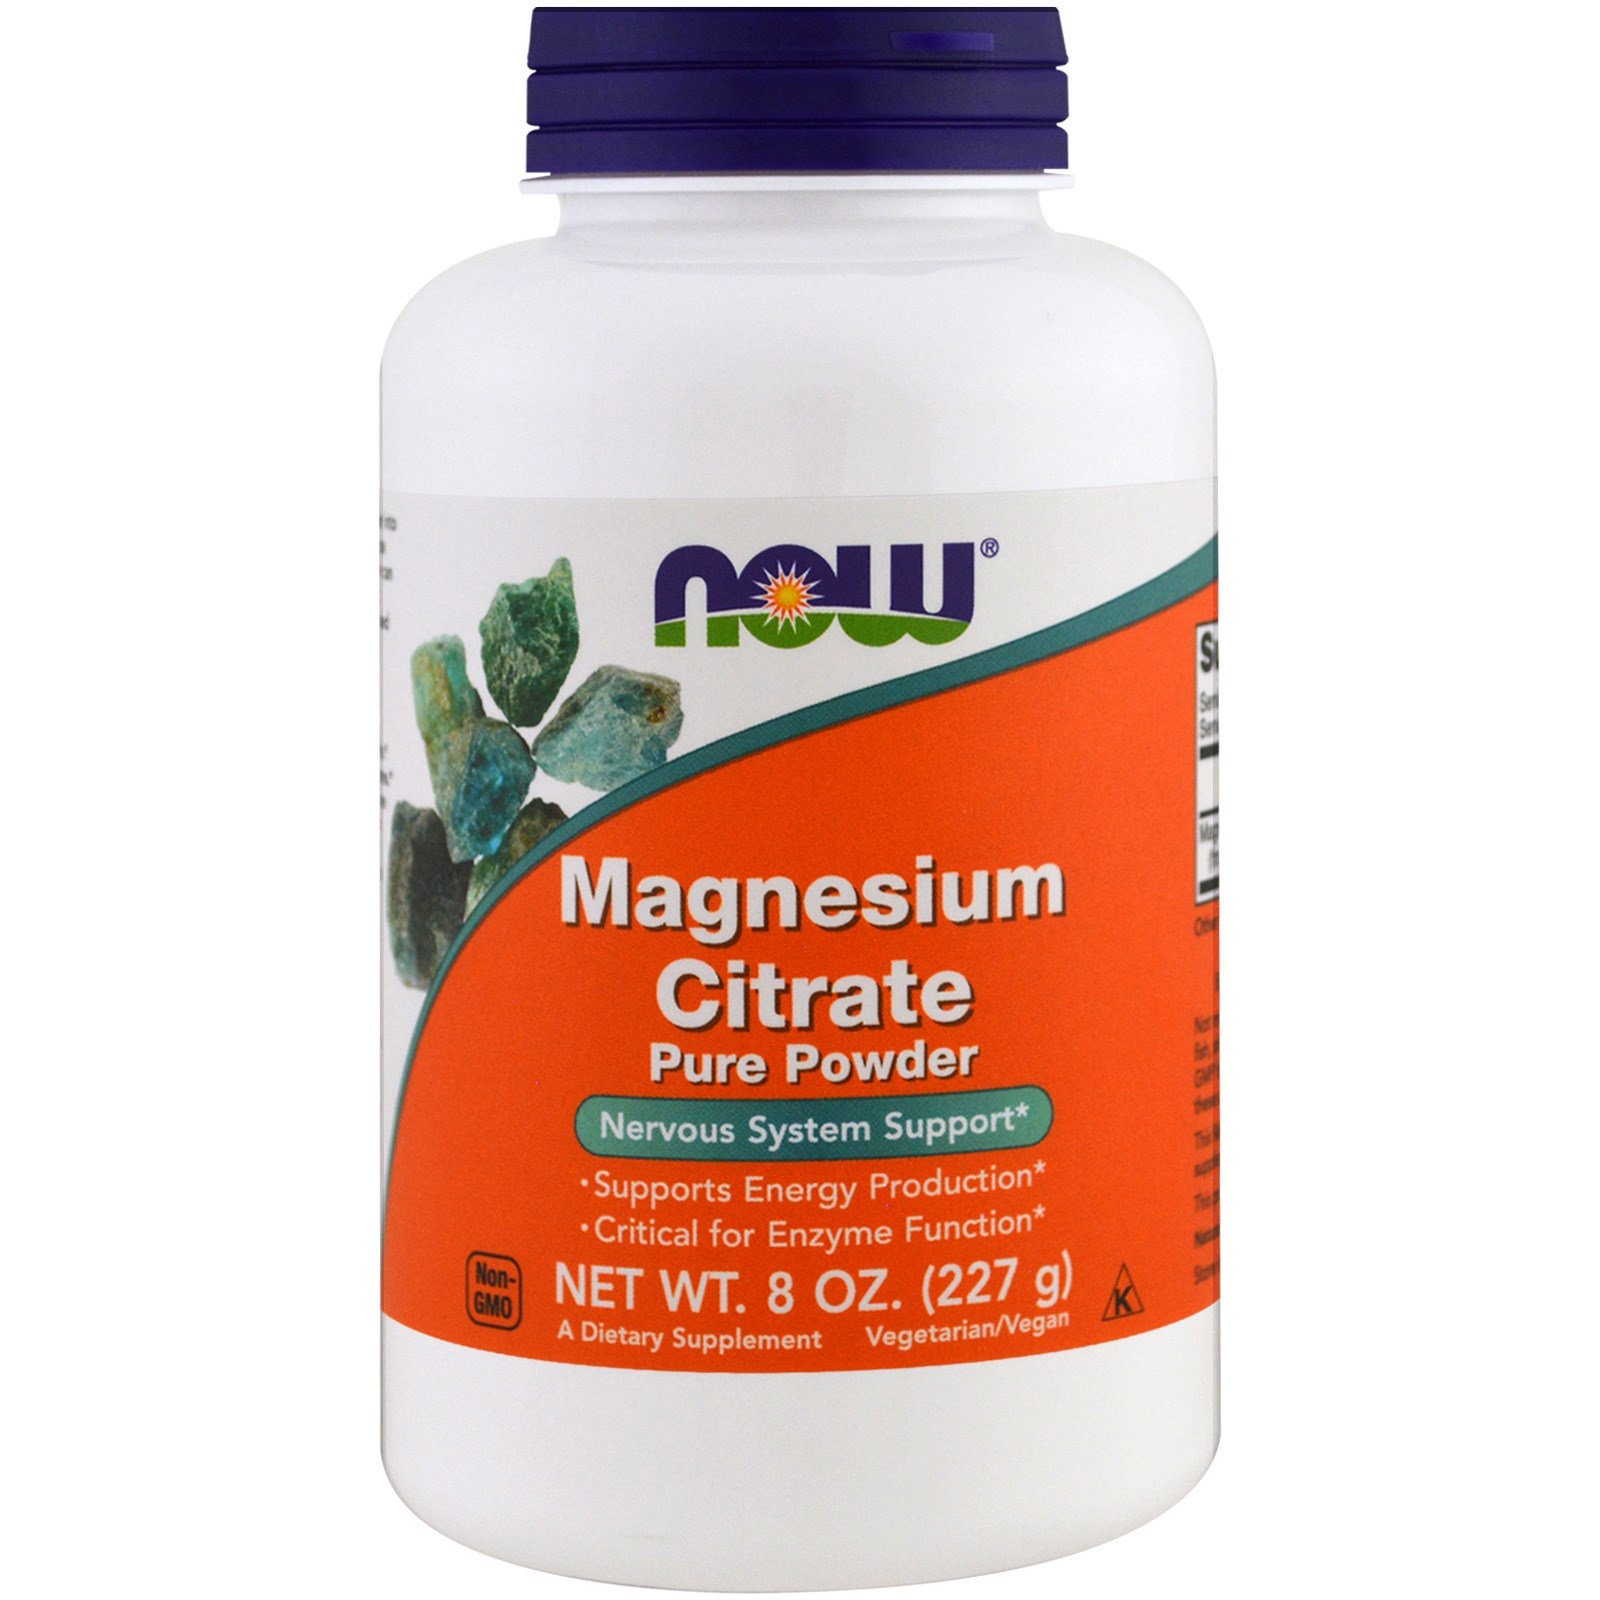 Now Foods Magnesium Citrate Pure Powder, 8 oz (227 g)